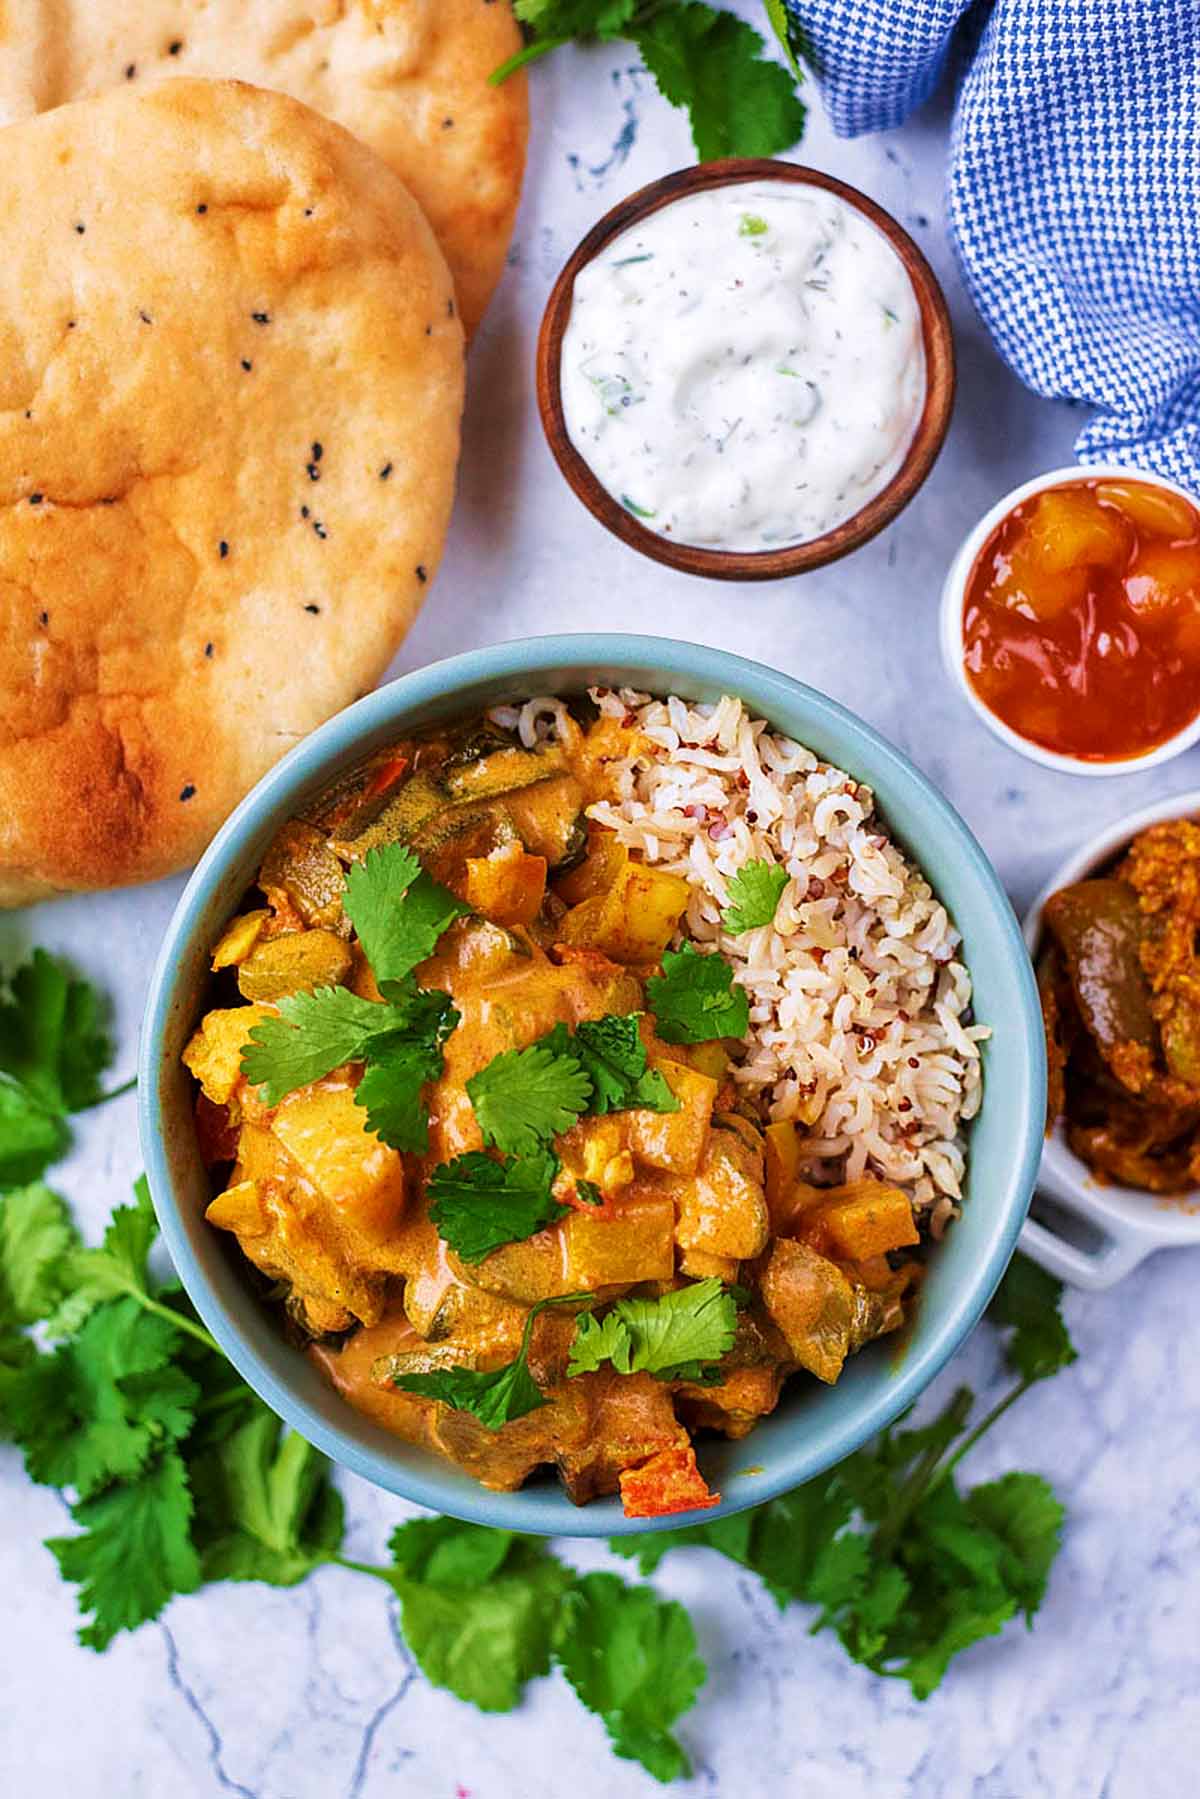 Vegetable curry in a blue bowl. Naan breads, raita, pickles and chutney sit next to it.